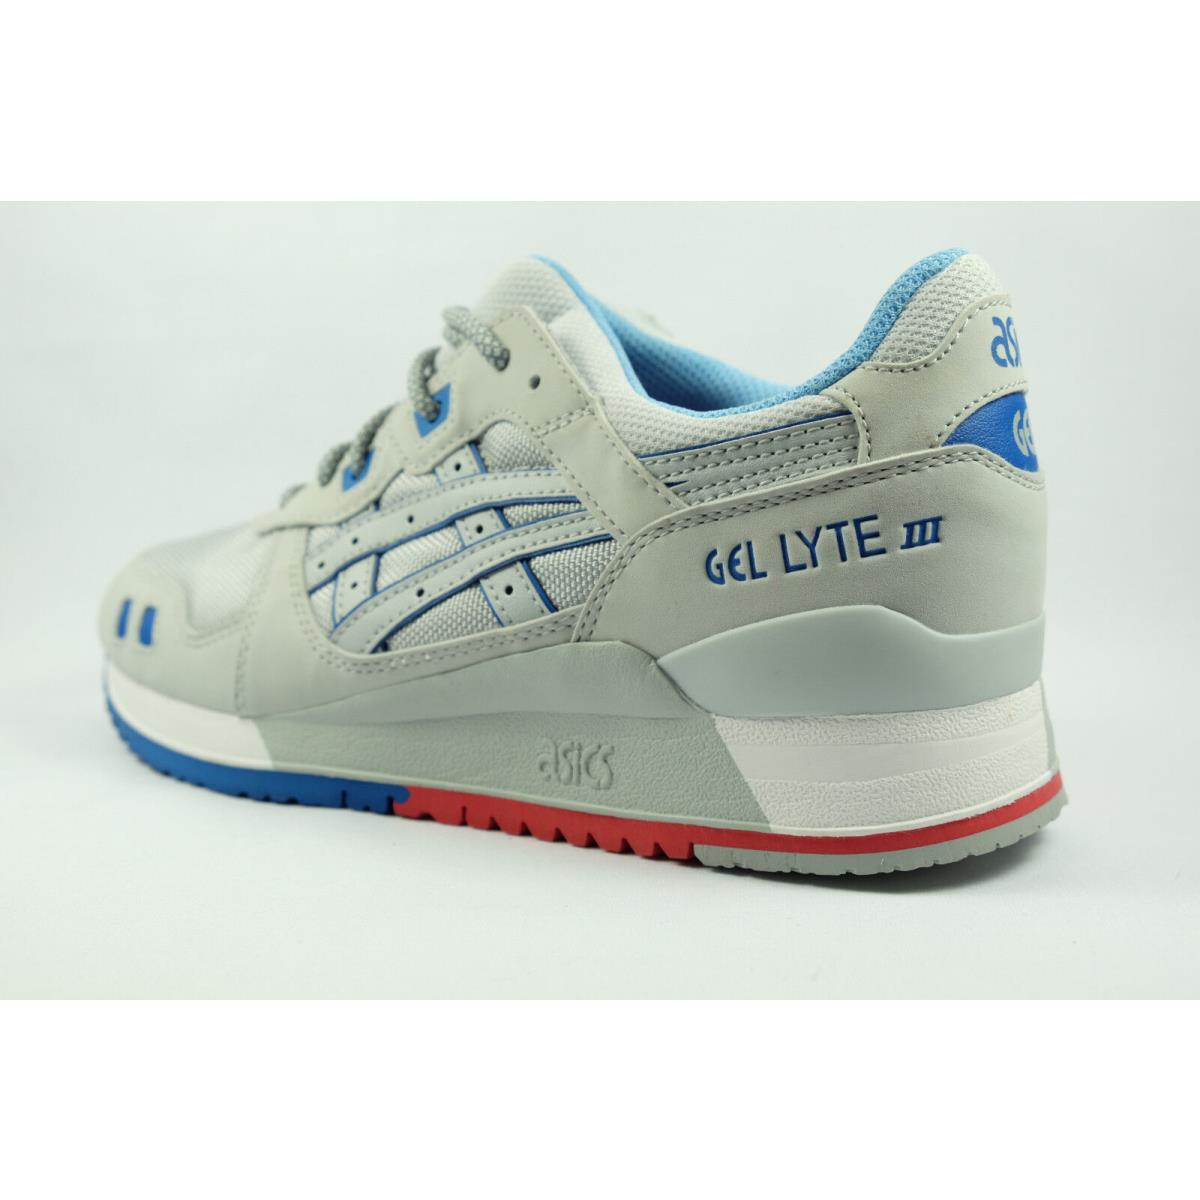 ASICS shoes III - Soft Grey / Blue / Red 1